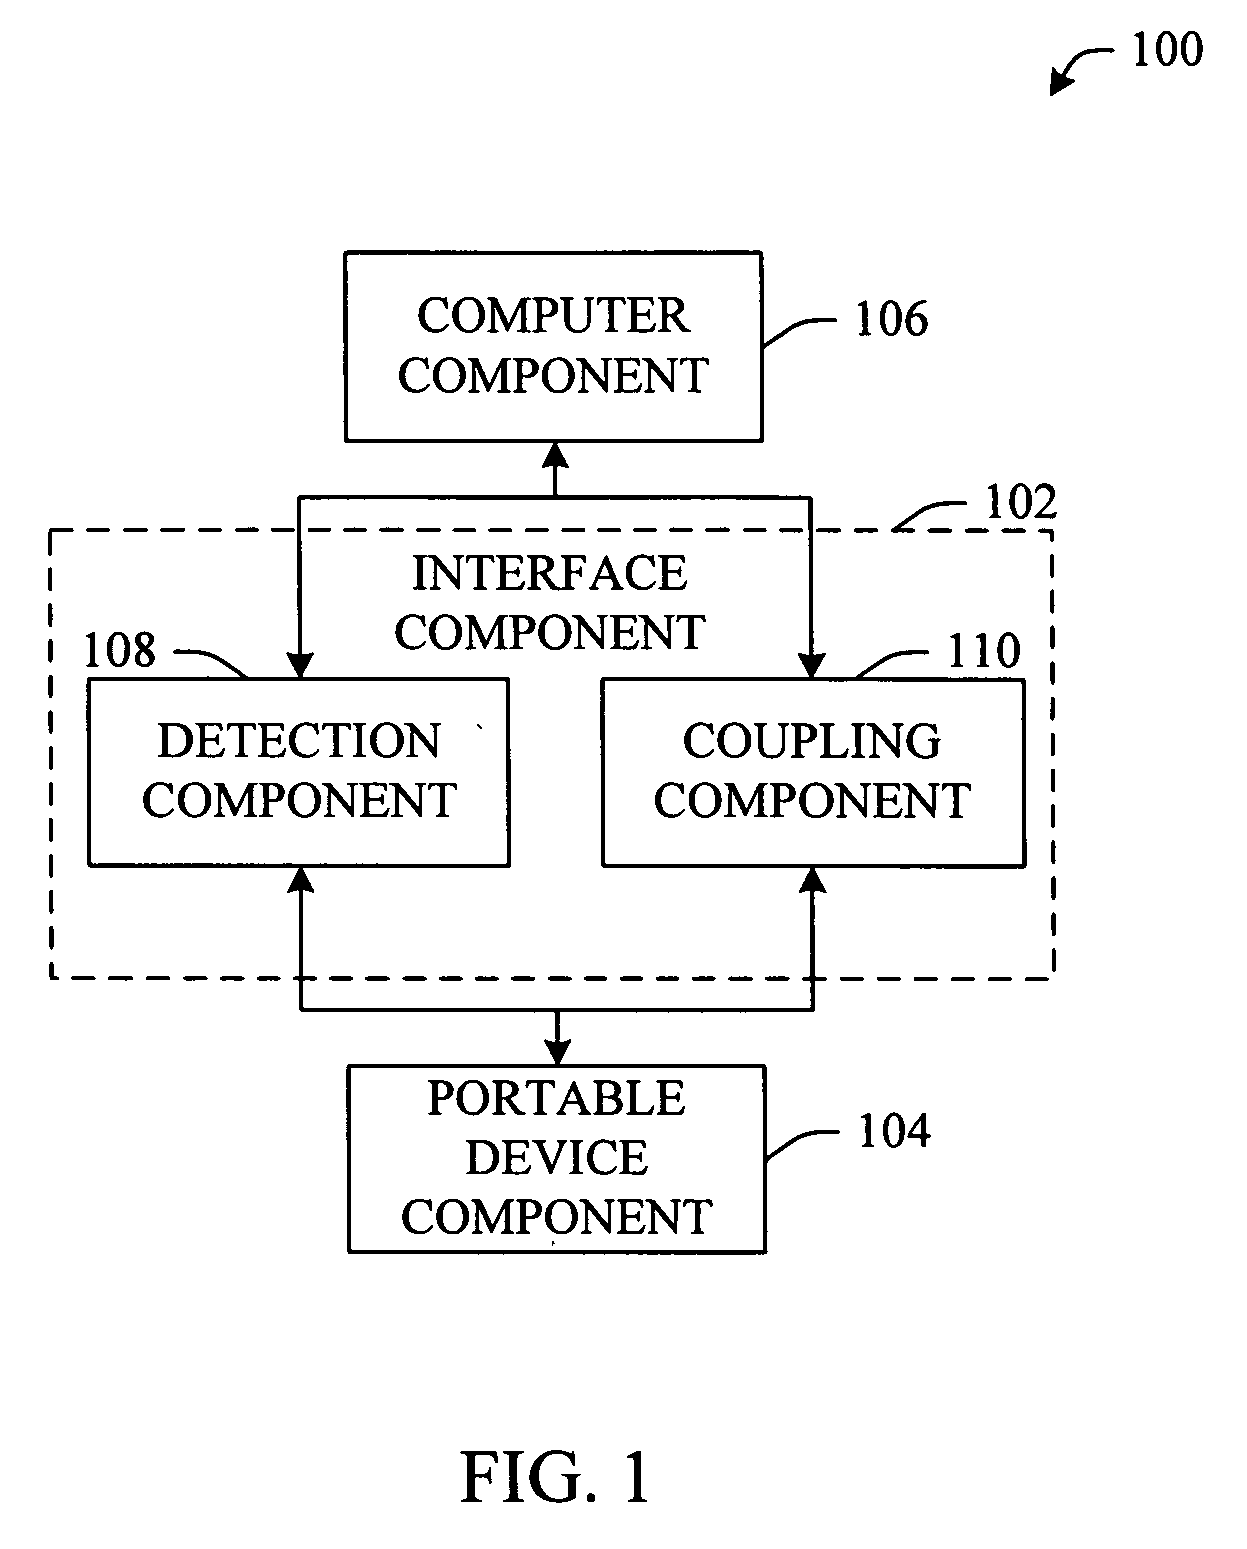 Seamless integration of portable computing devices and desktop computers